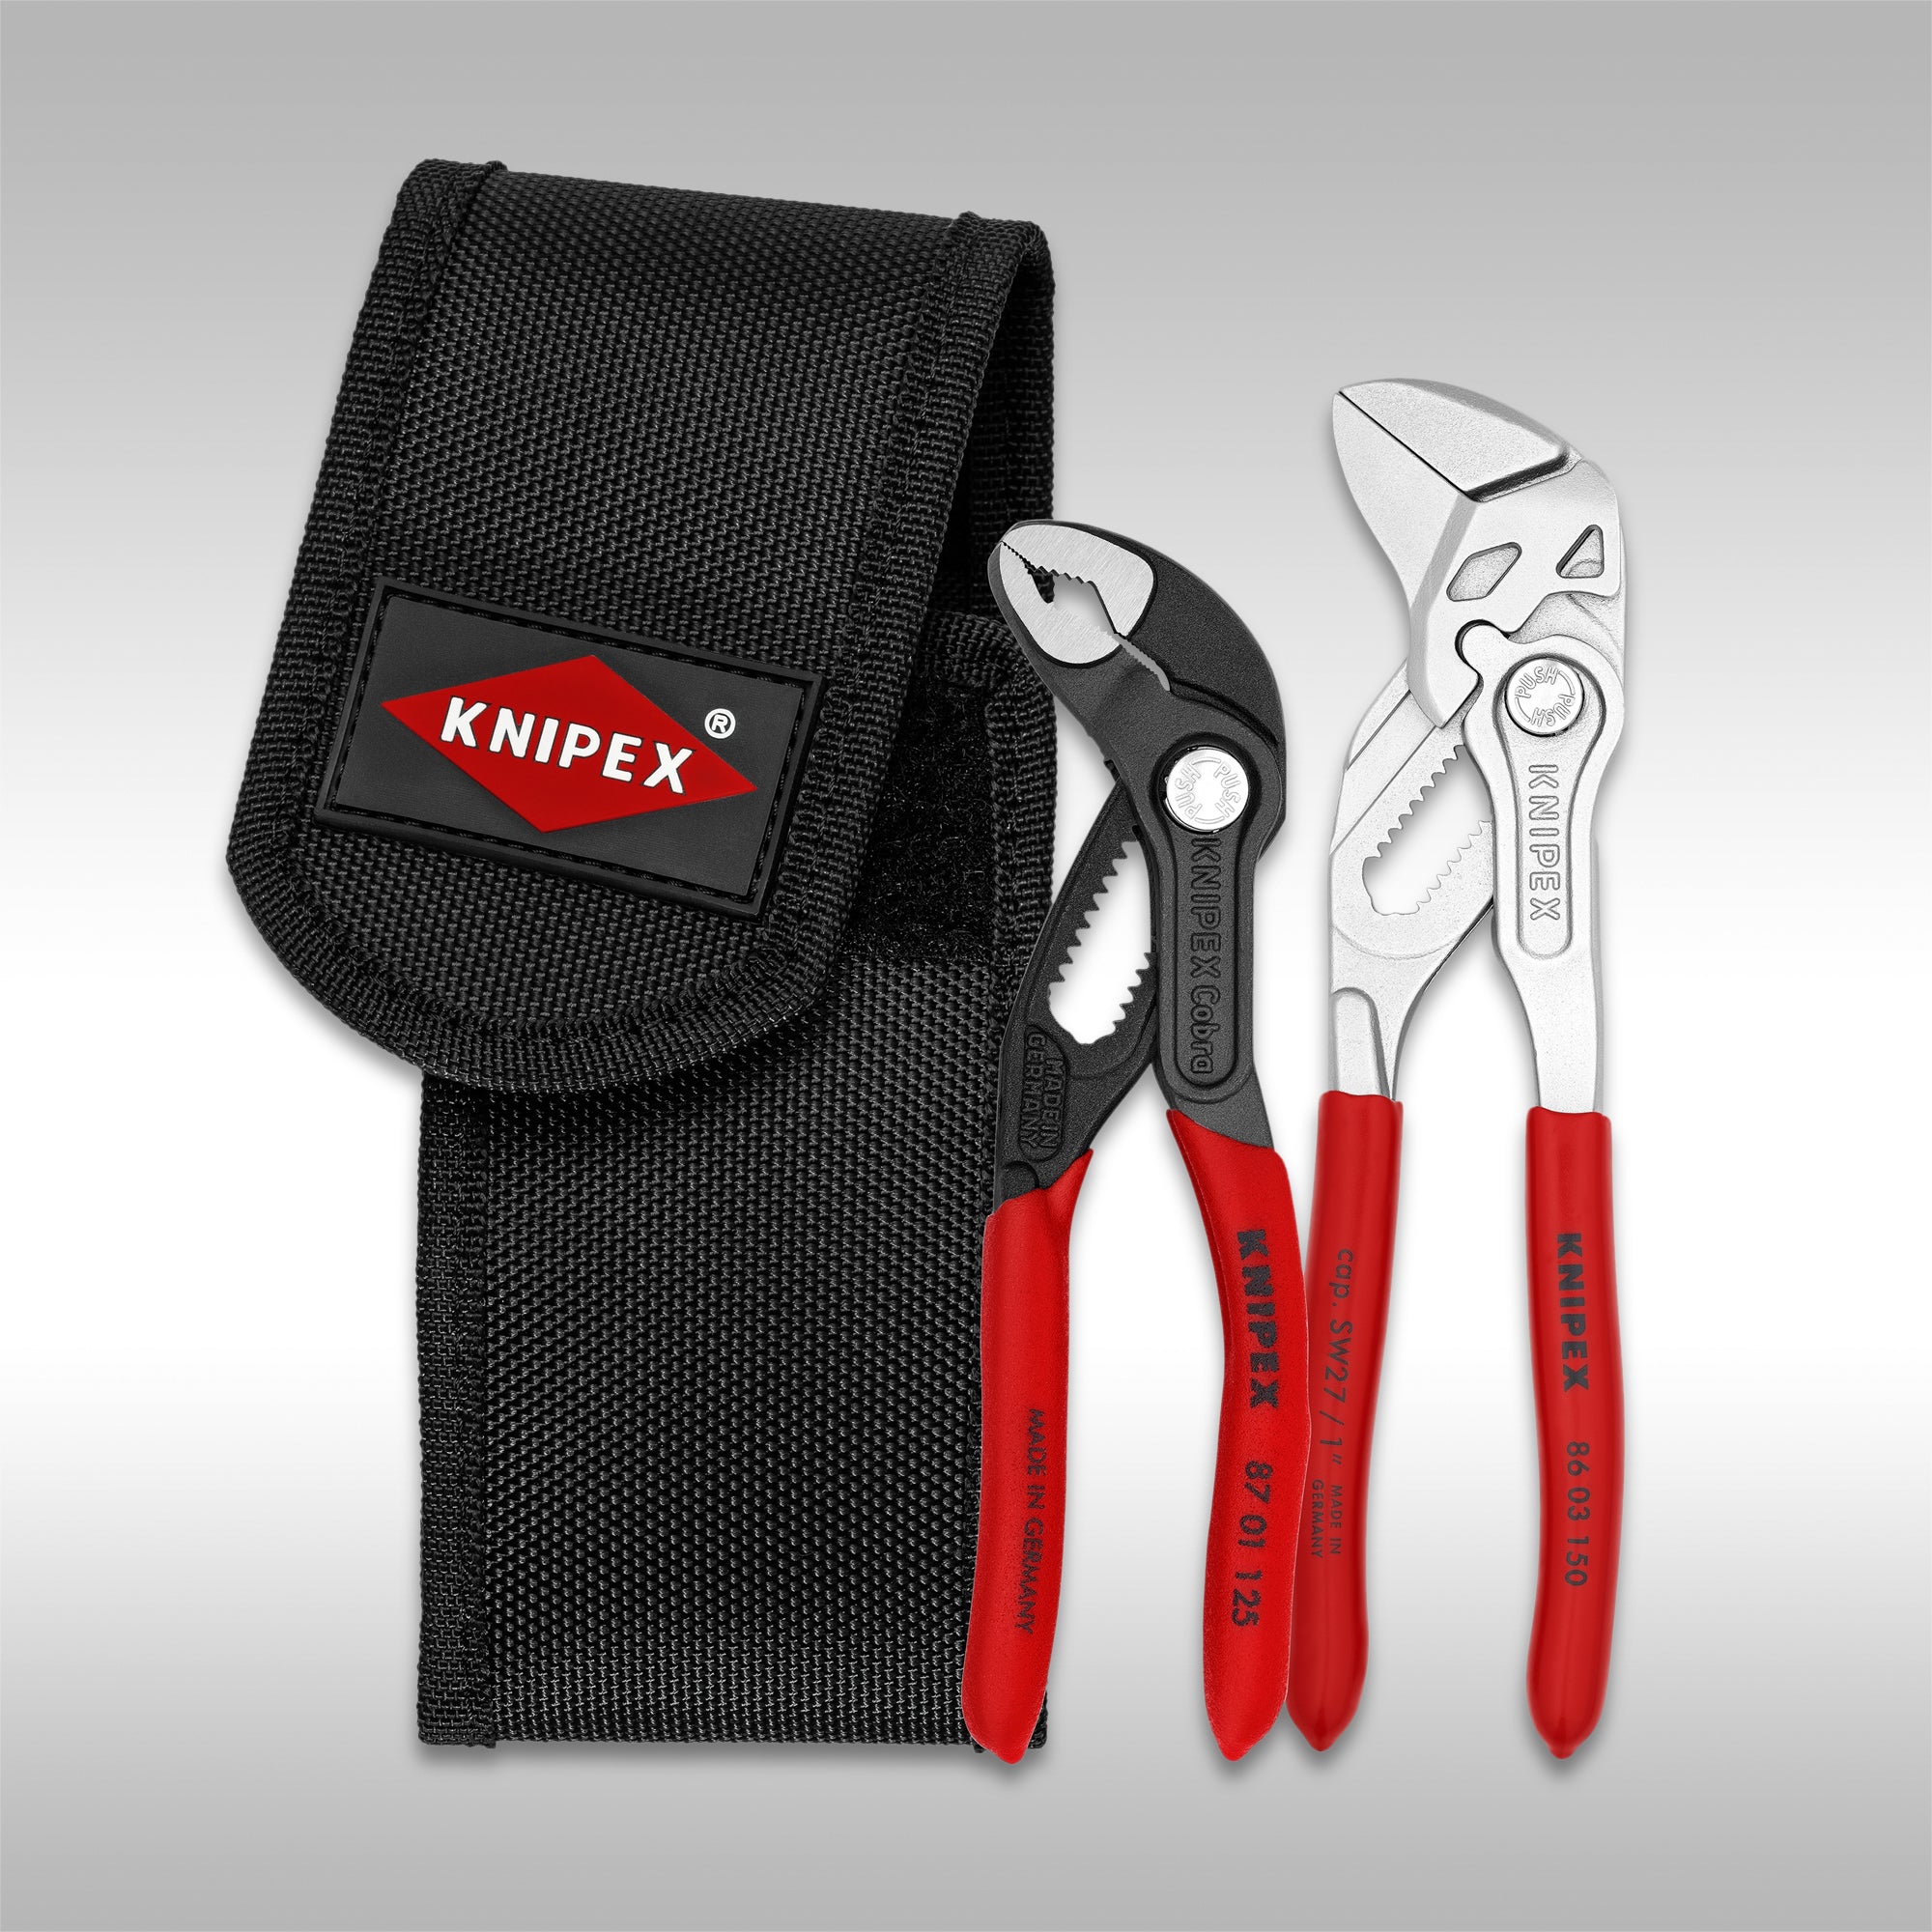 KNIPEX - 2 PIECE MINI PLIERS IN BELT POUCH - 6" PLIERS WRENCH & 5" COBRA